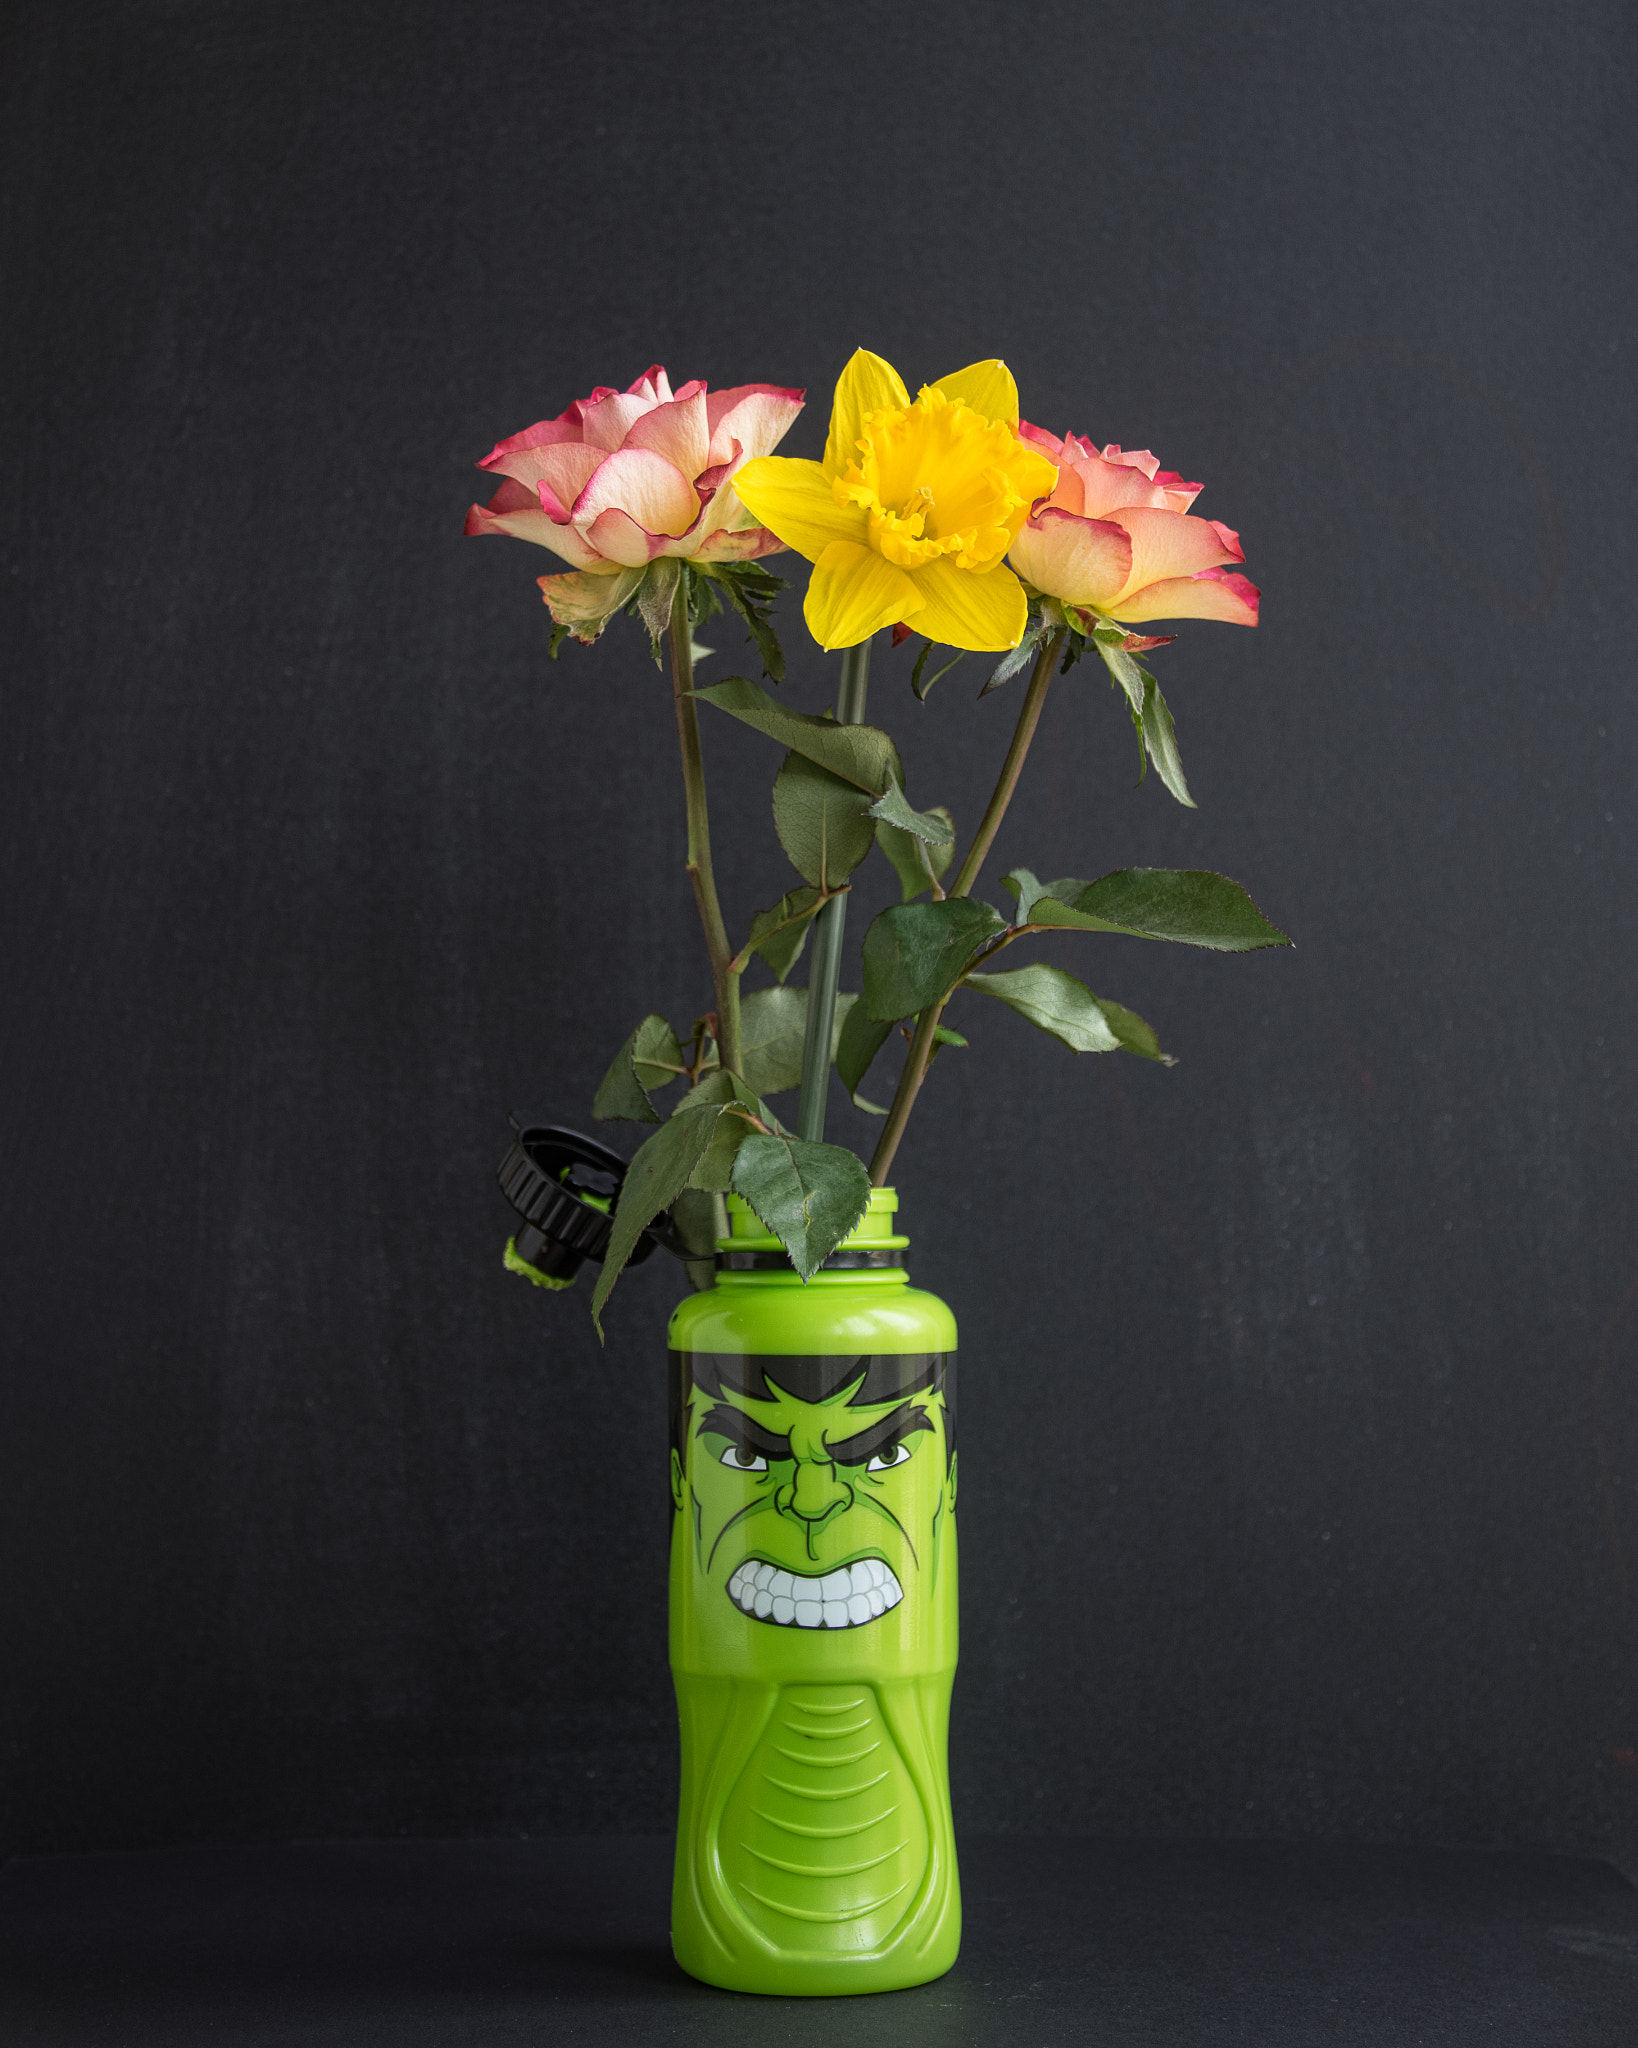 Pentax K-3 sample photo. Two roses a daffodil and the hulk photography